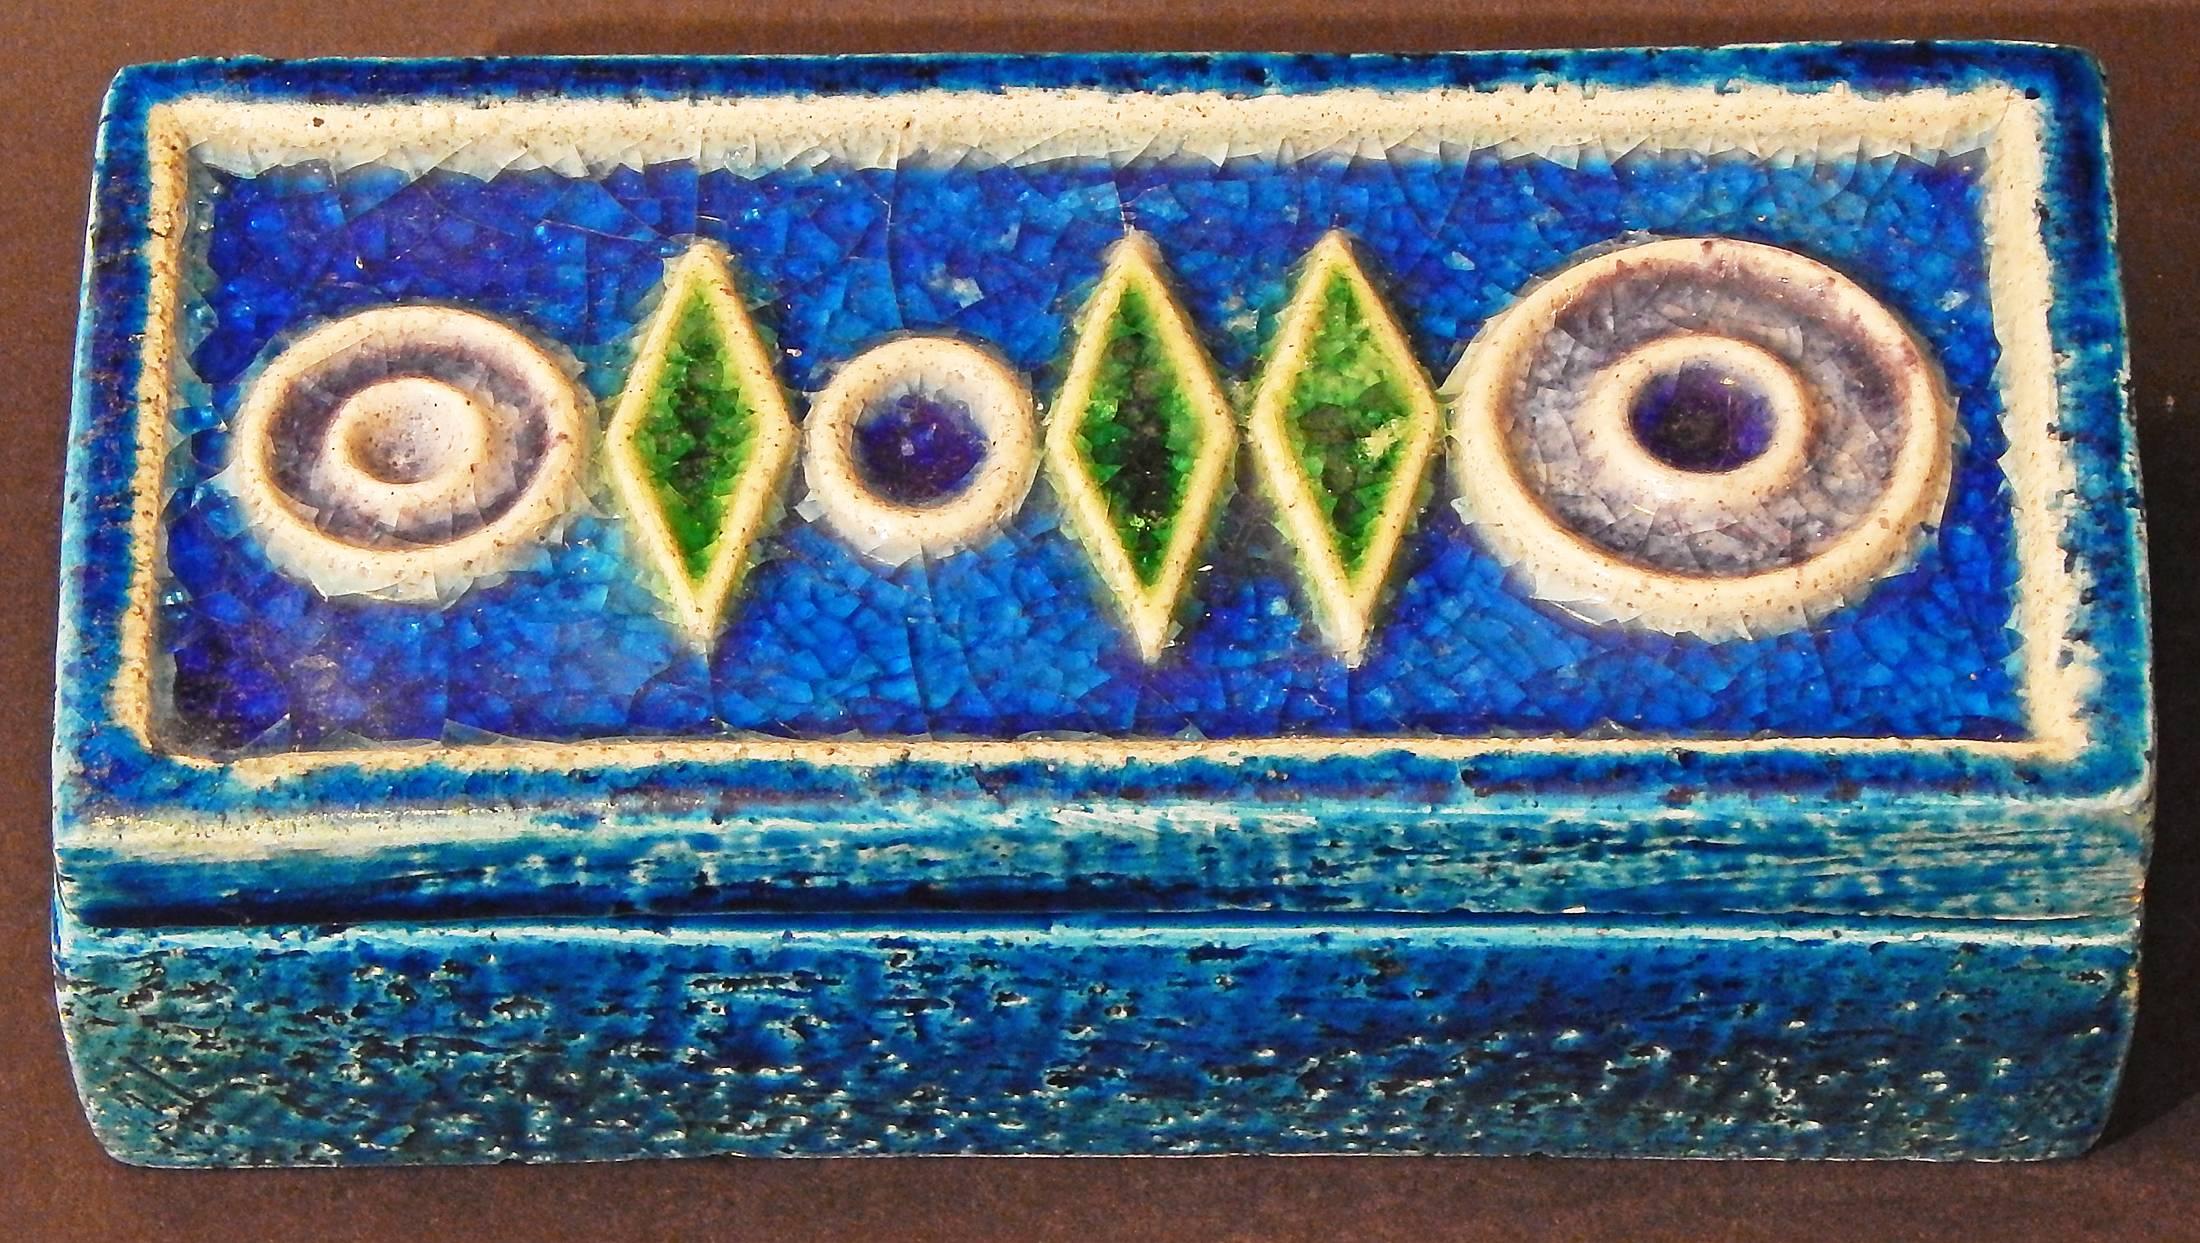 Highly unusual and brilliantly glazed, this covered box features a sequence of geometric shapes in bas relief that are filled with pools of vivid, jewel-toned glazes in sapphire, emerald and amethyst hues. Like Waylande Gregory, the Italian artisan